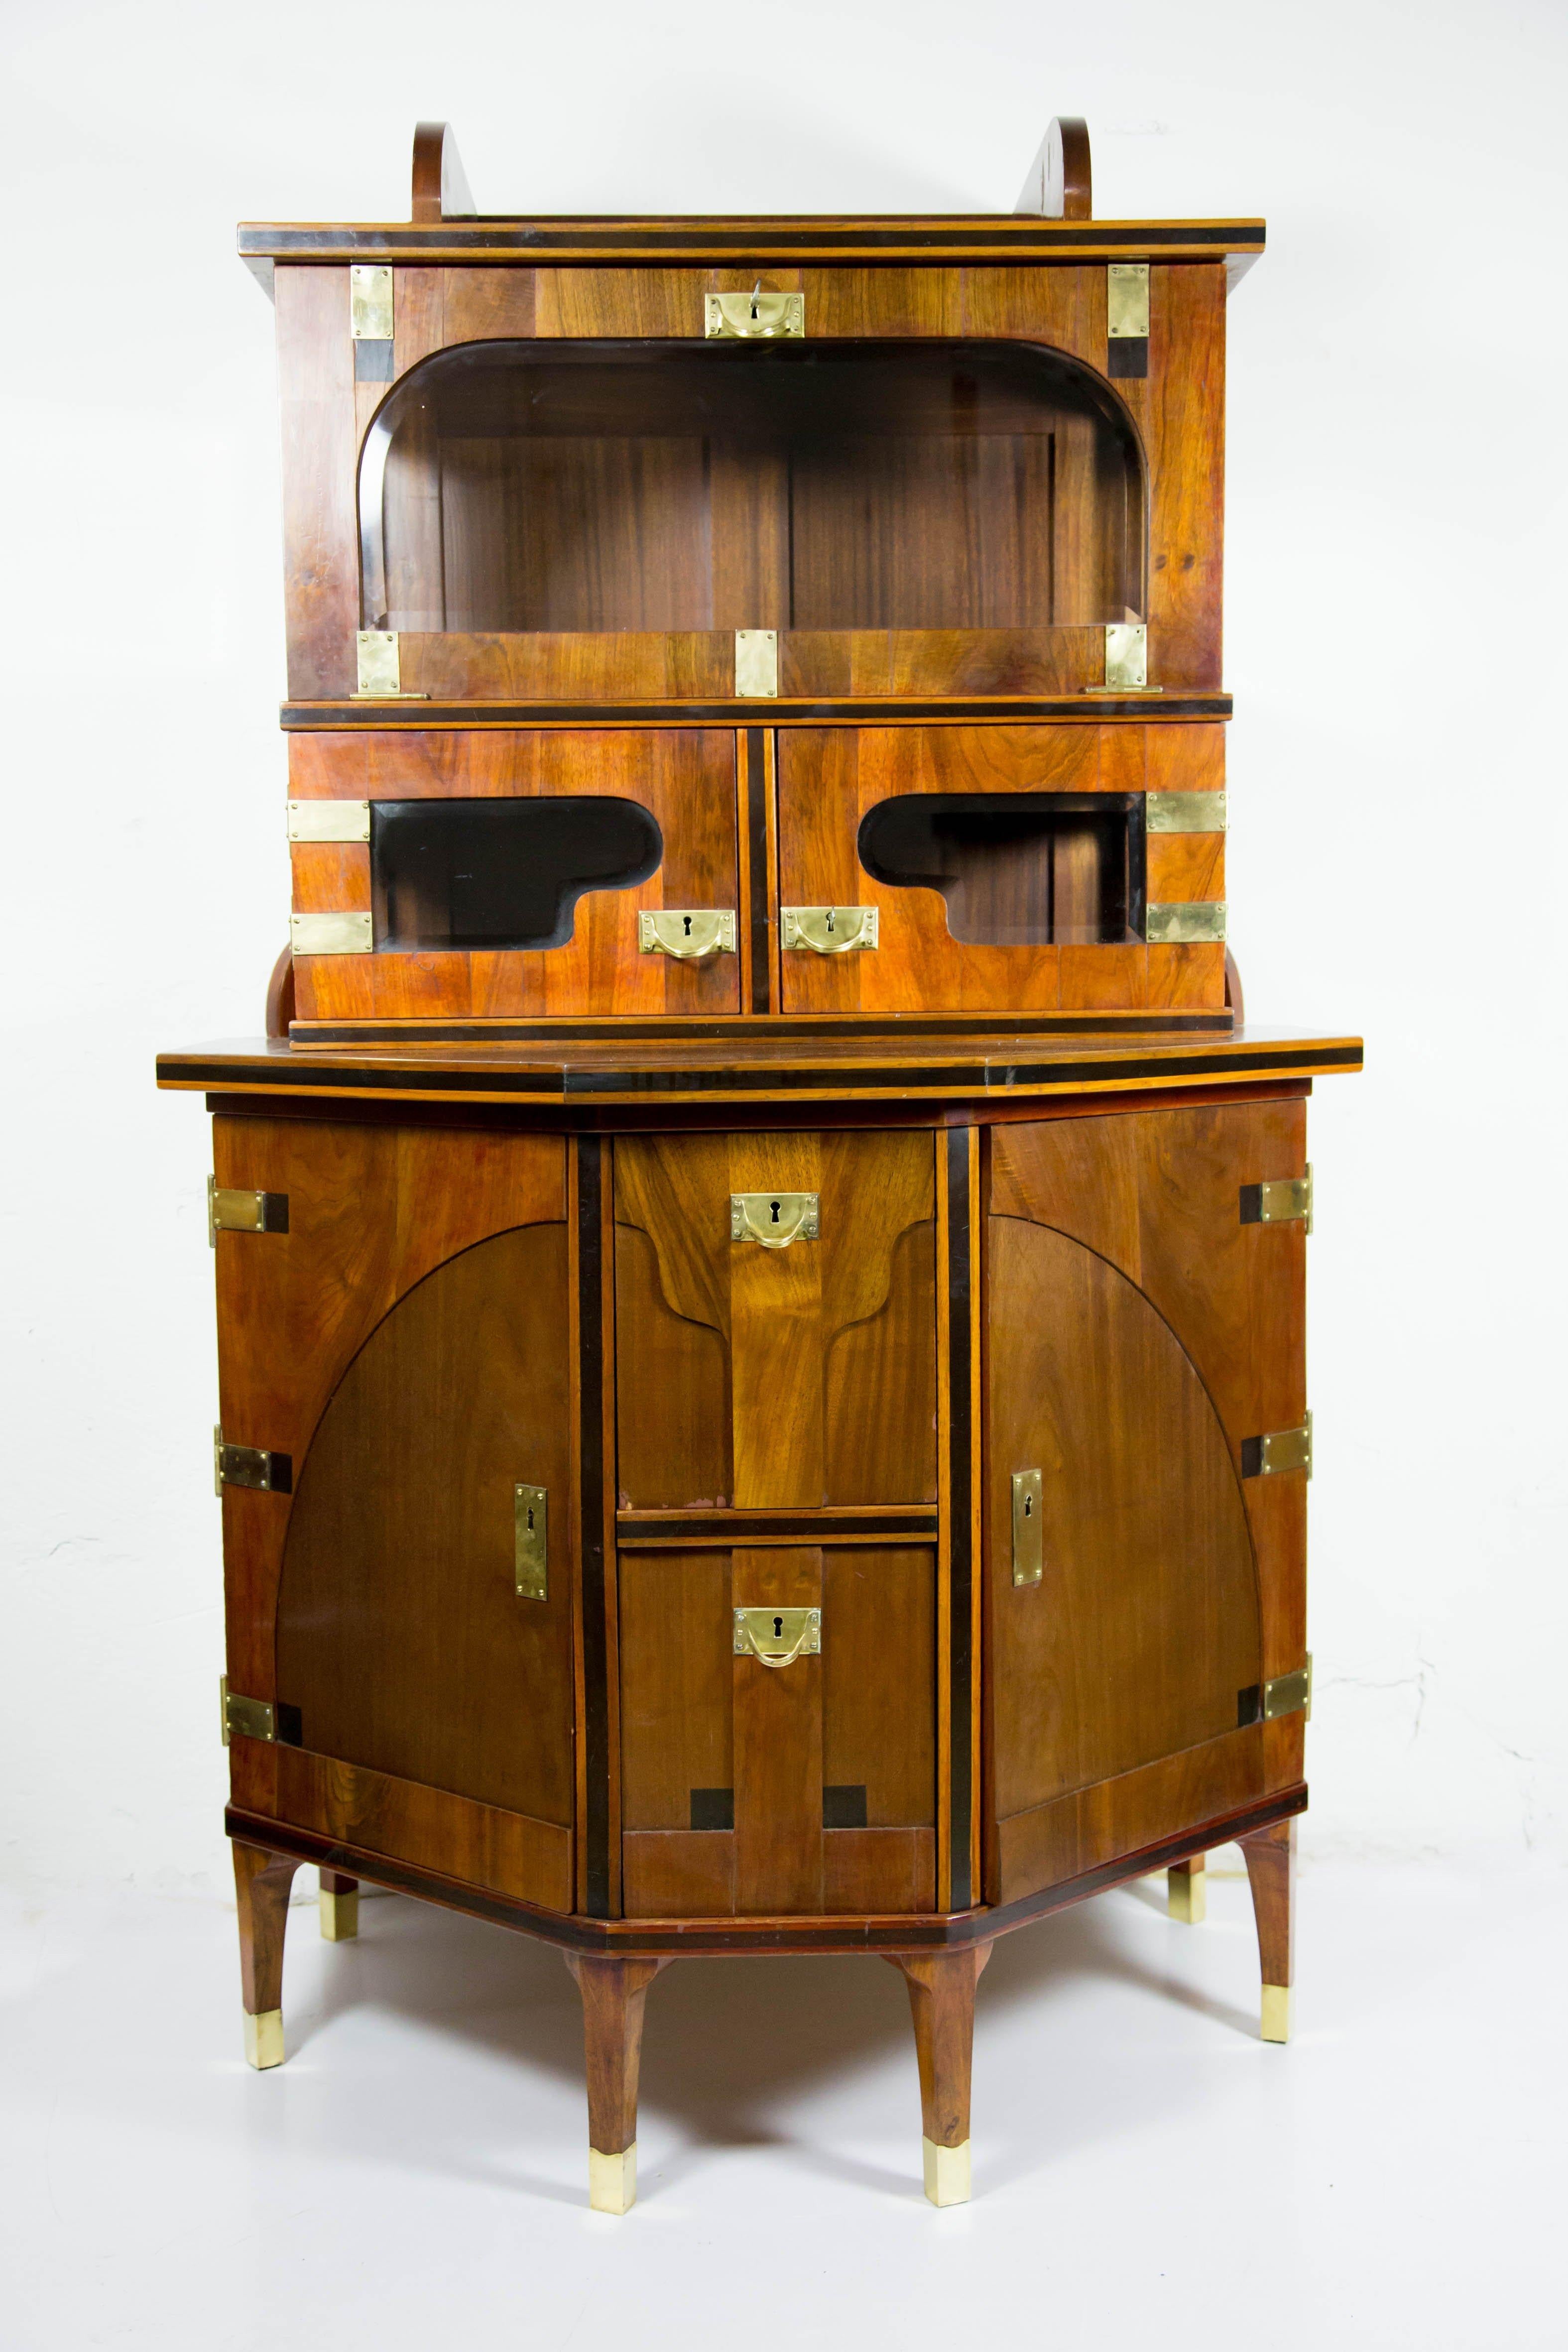 This turn of the century bar/buffet is a rarity from Vienna. It features mahogany veneer, hand polished, original facetted glass windows and polished brass accessories.
This vintage item remains fully functional, but it shows sign of age through